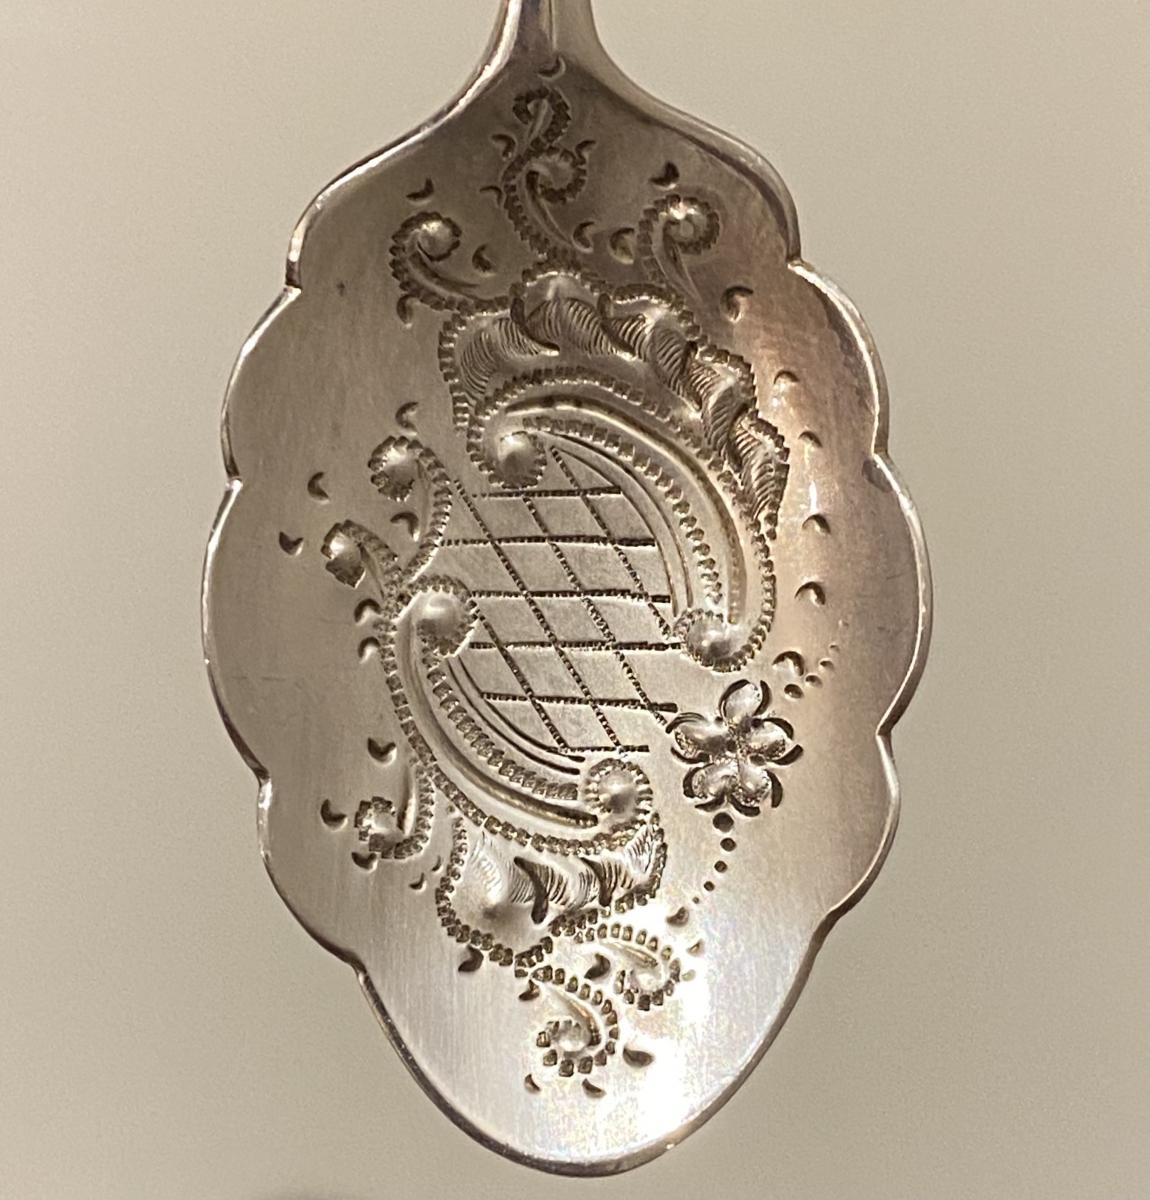 James Dixon and Sons silver jam spoon 1903